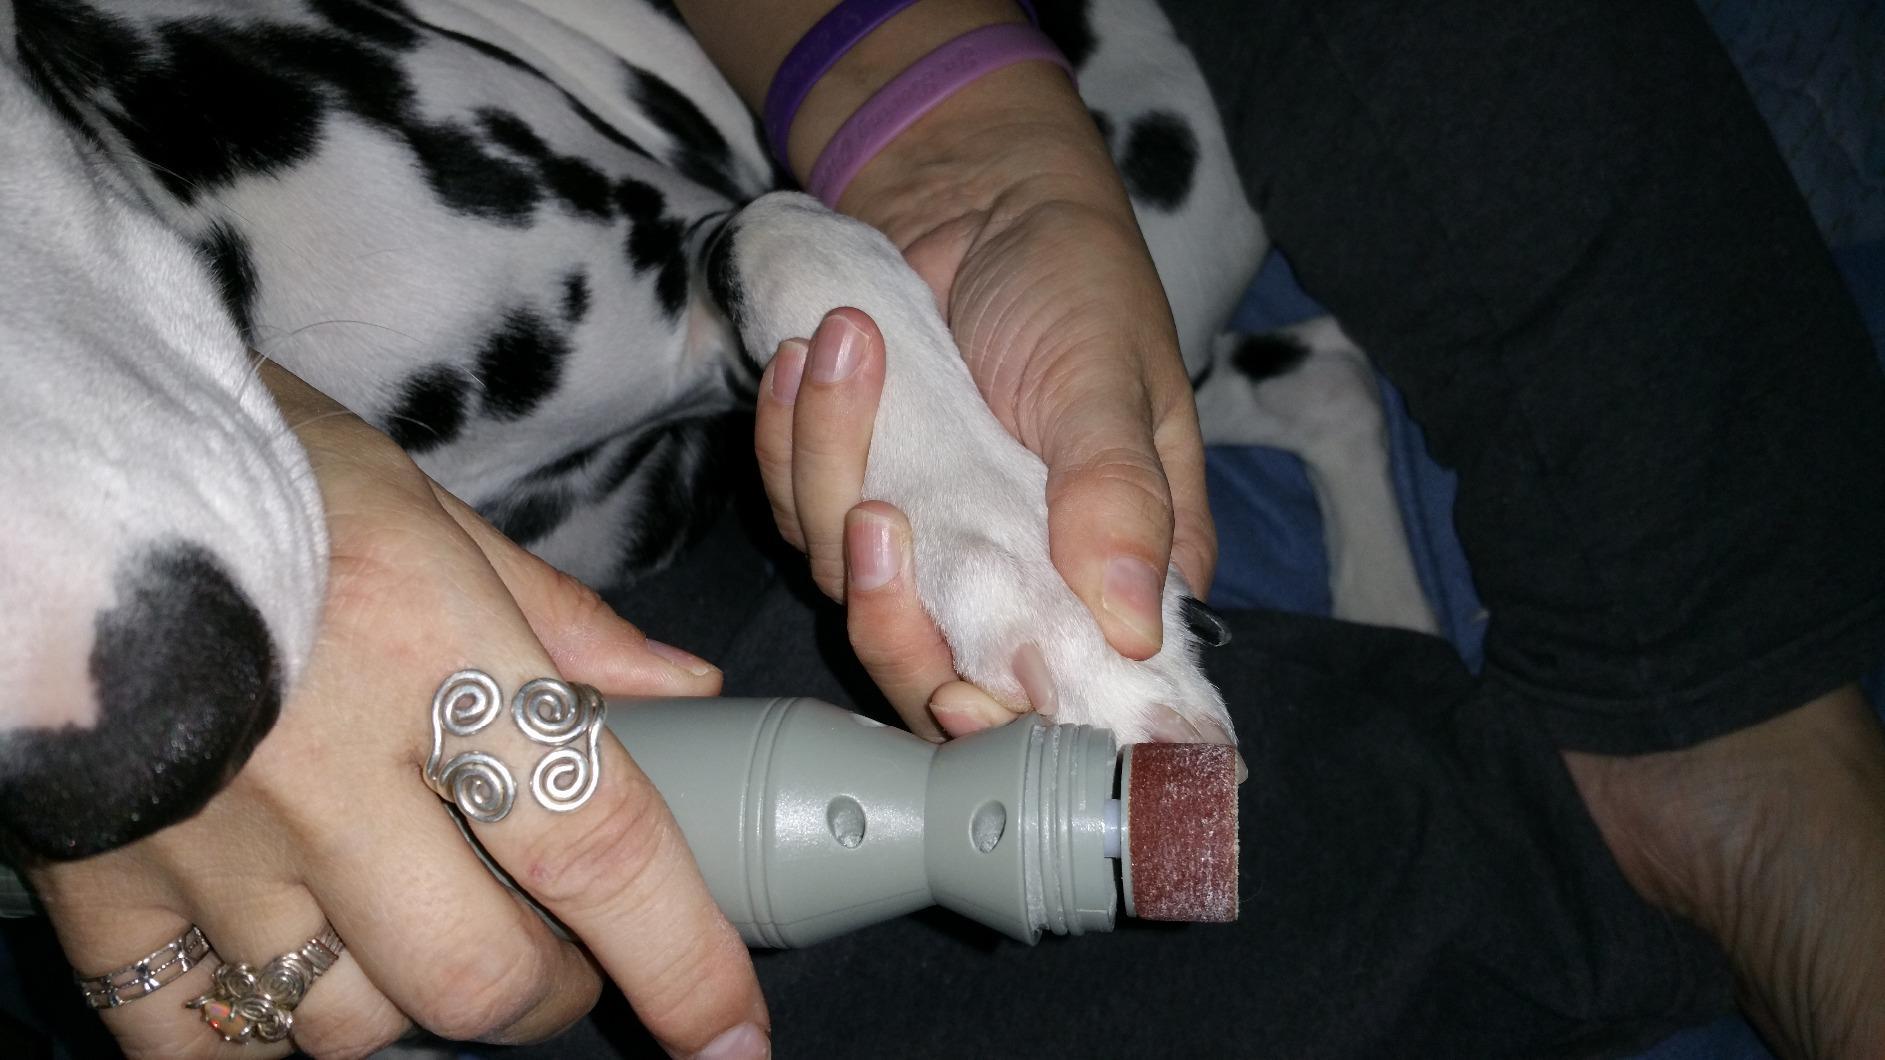 Premium Painless Nail Clipper For Pets - All Size Dogs & Cats photo review